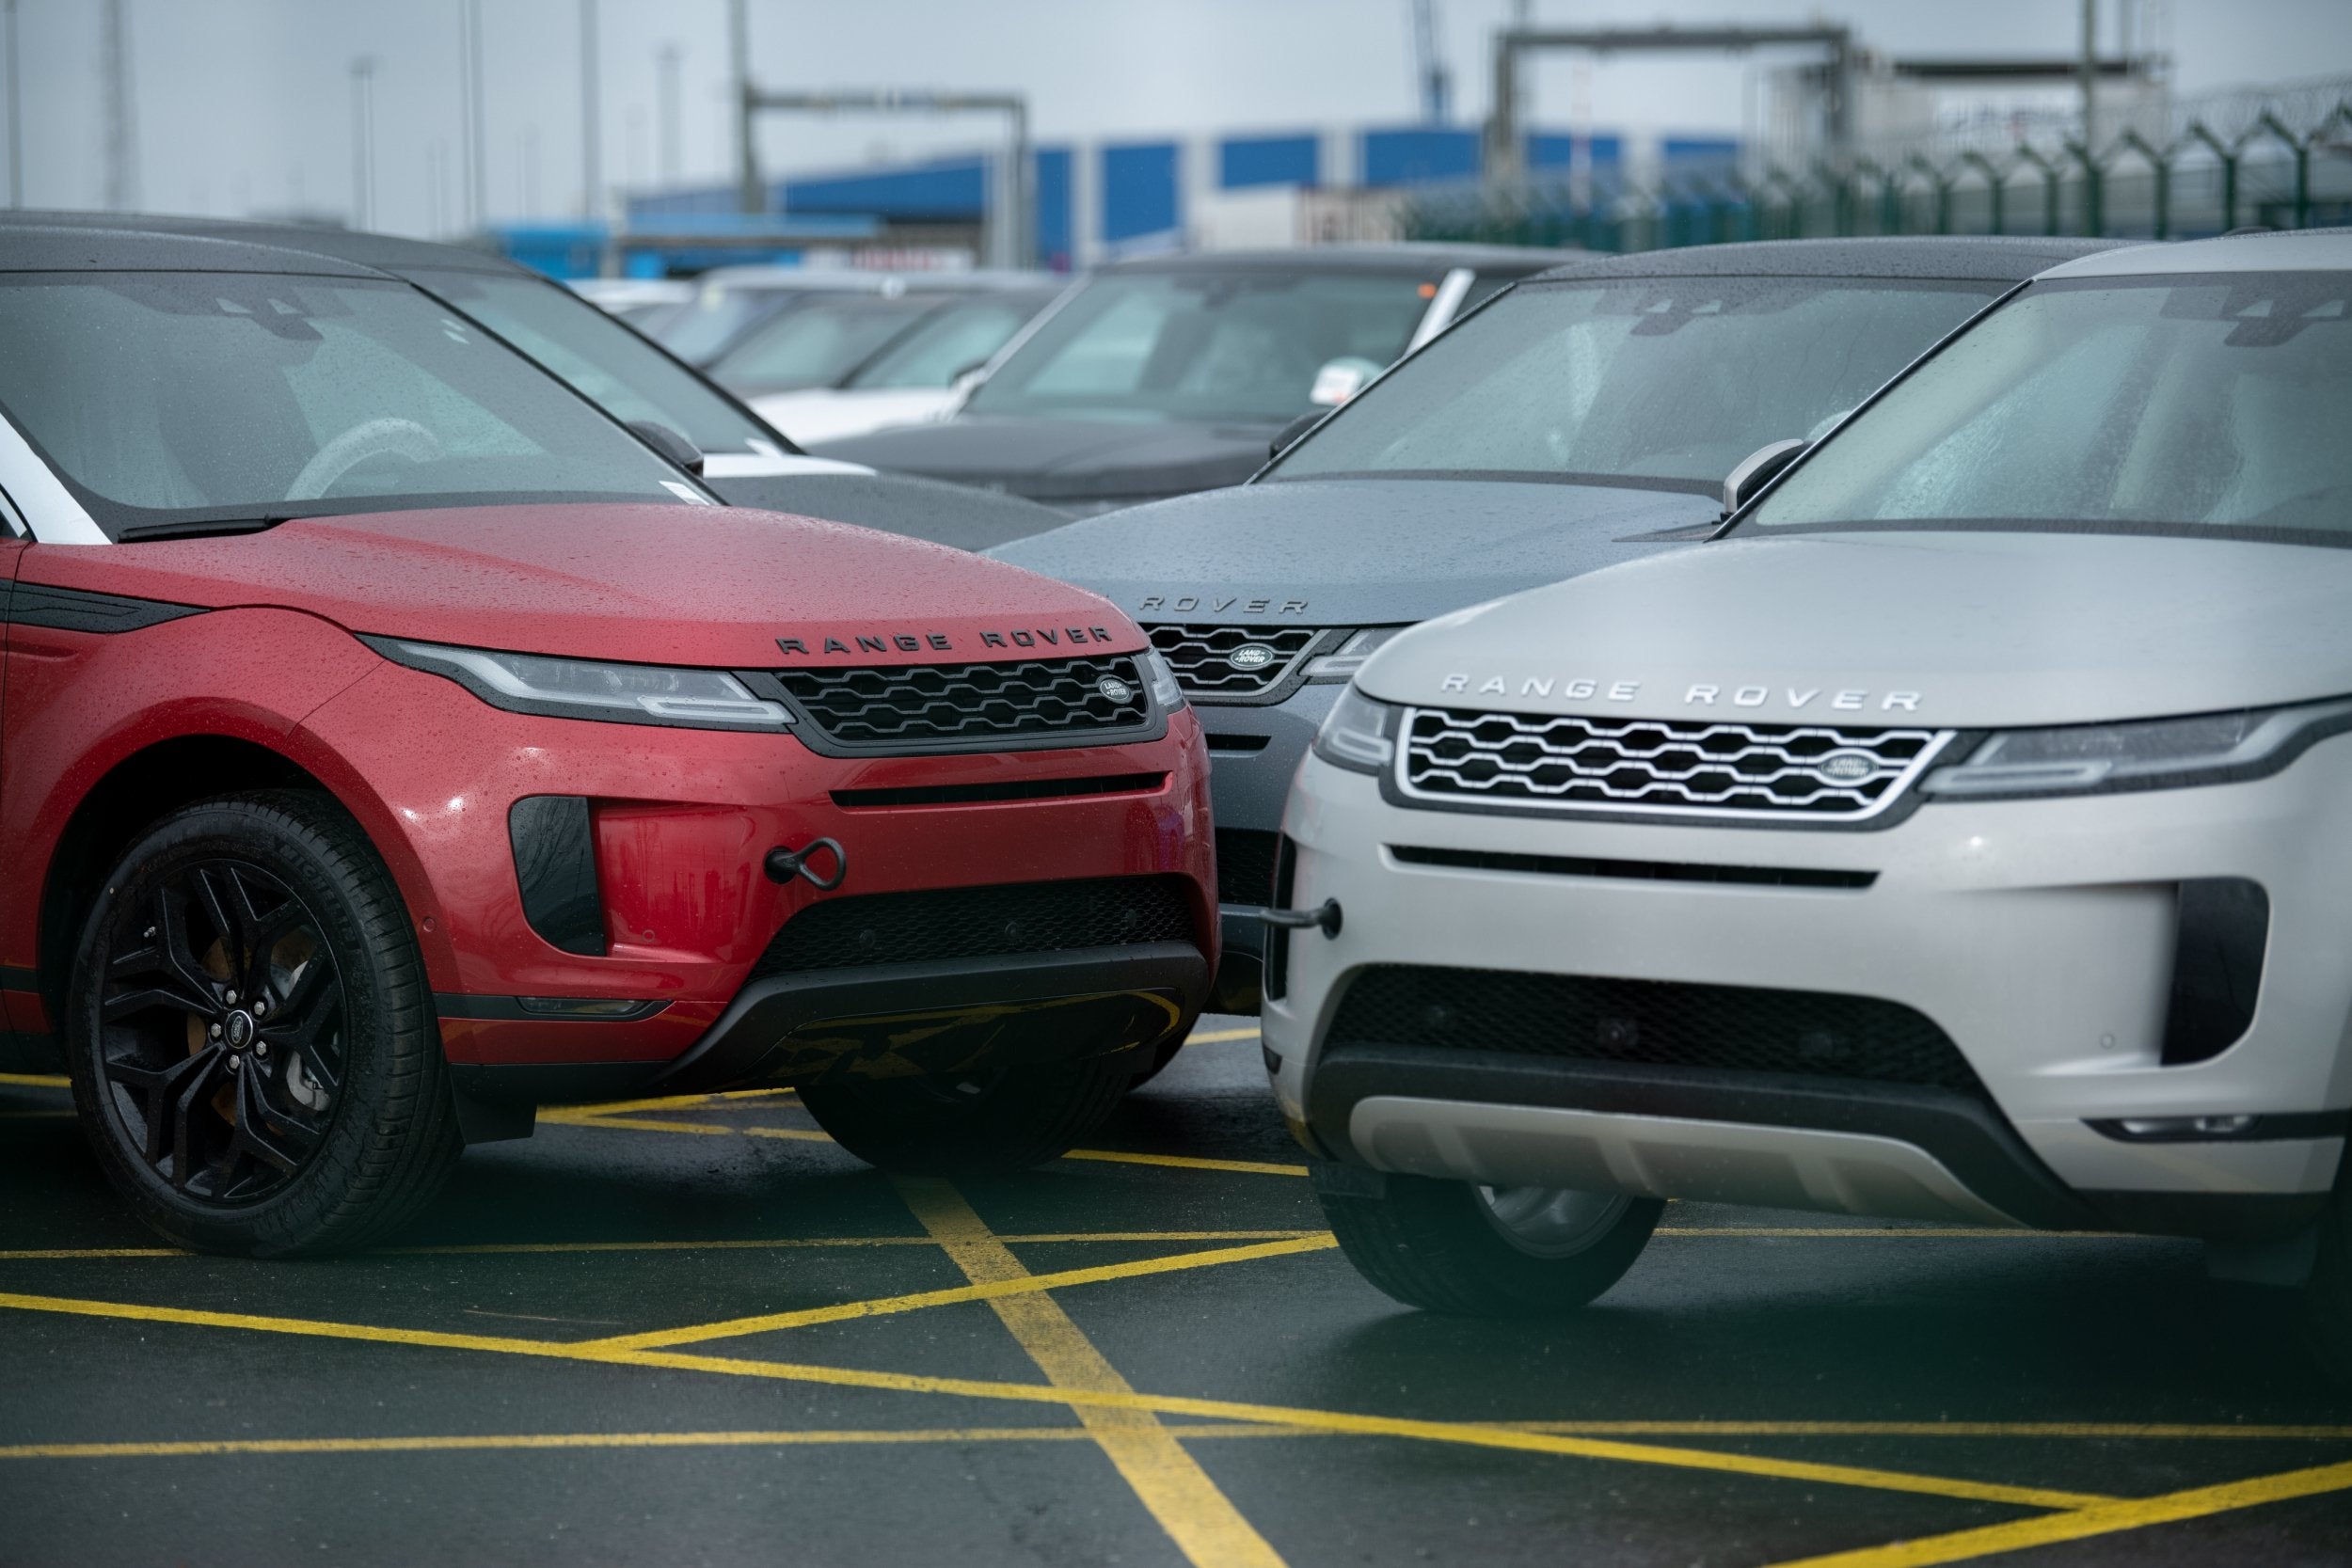 Related video: Jaguar Land Rover CEO on car manufacturing in the UK after Brexit